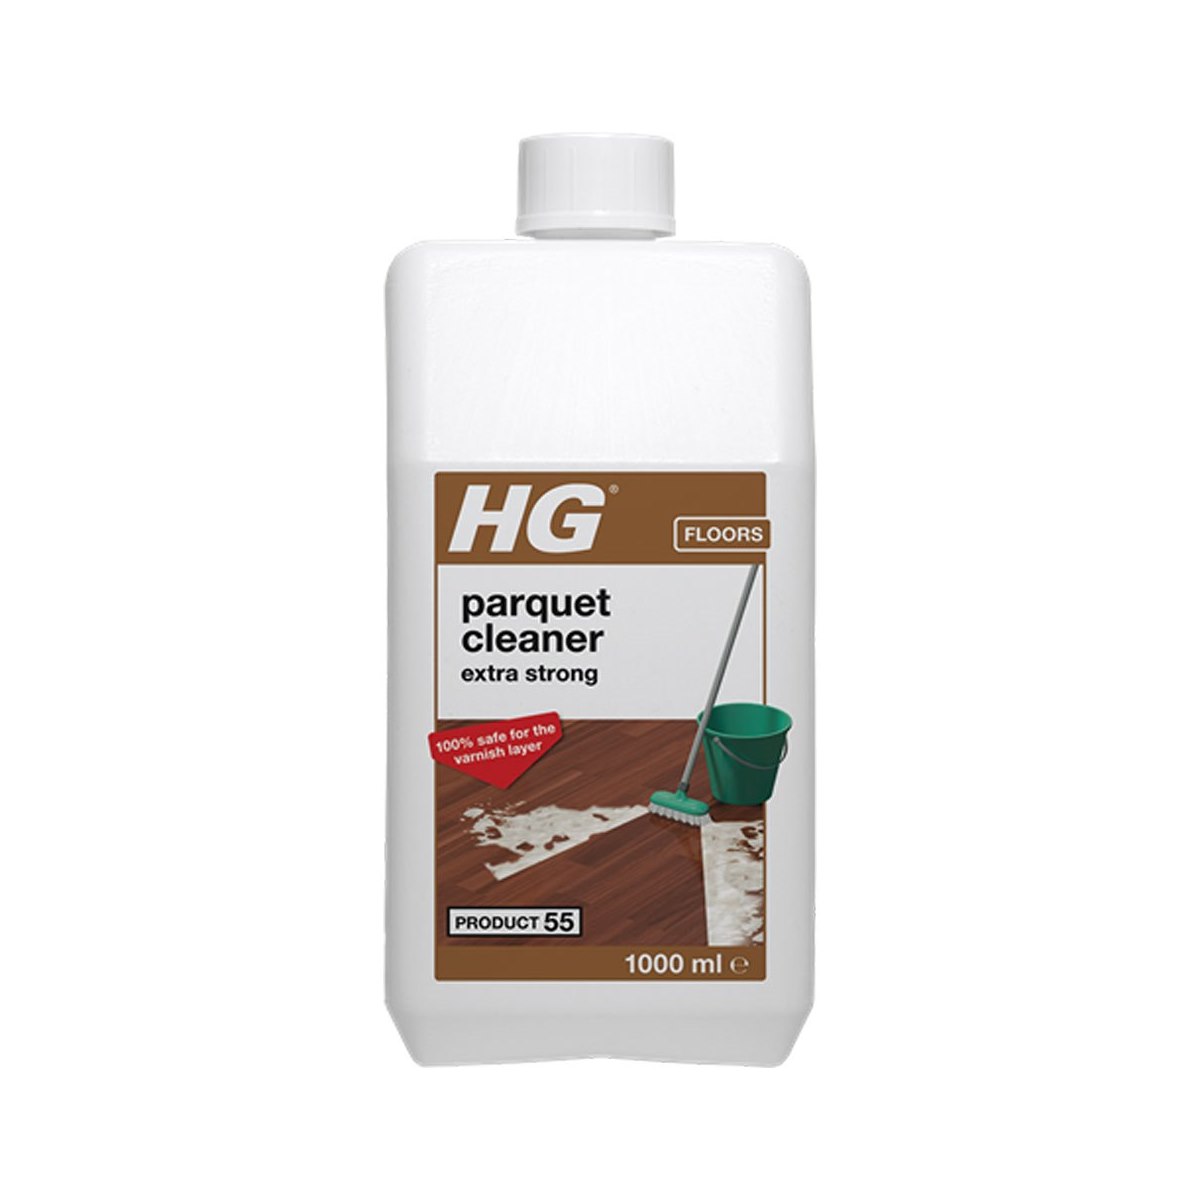 HG Parquet Cleaner Extra Strong (Product 55) 1 Litre